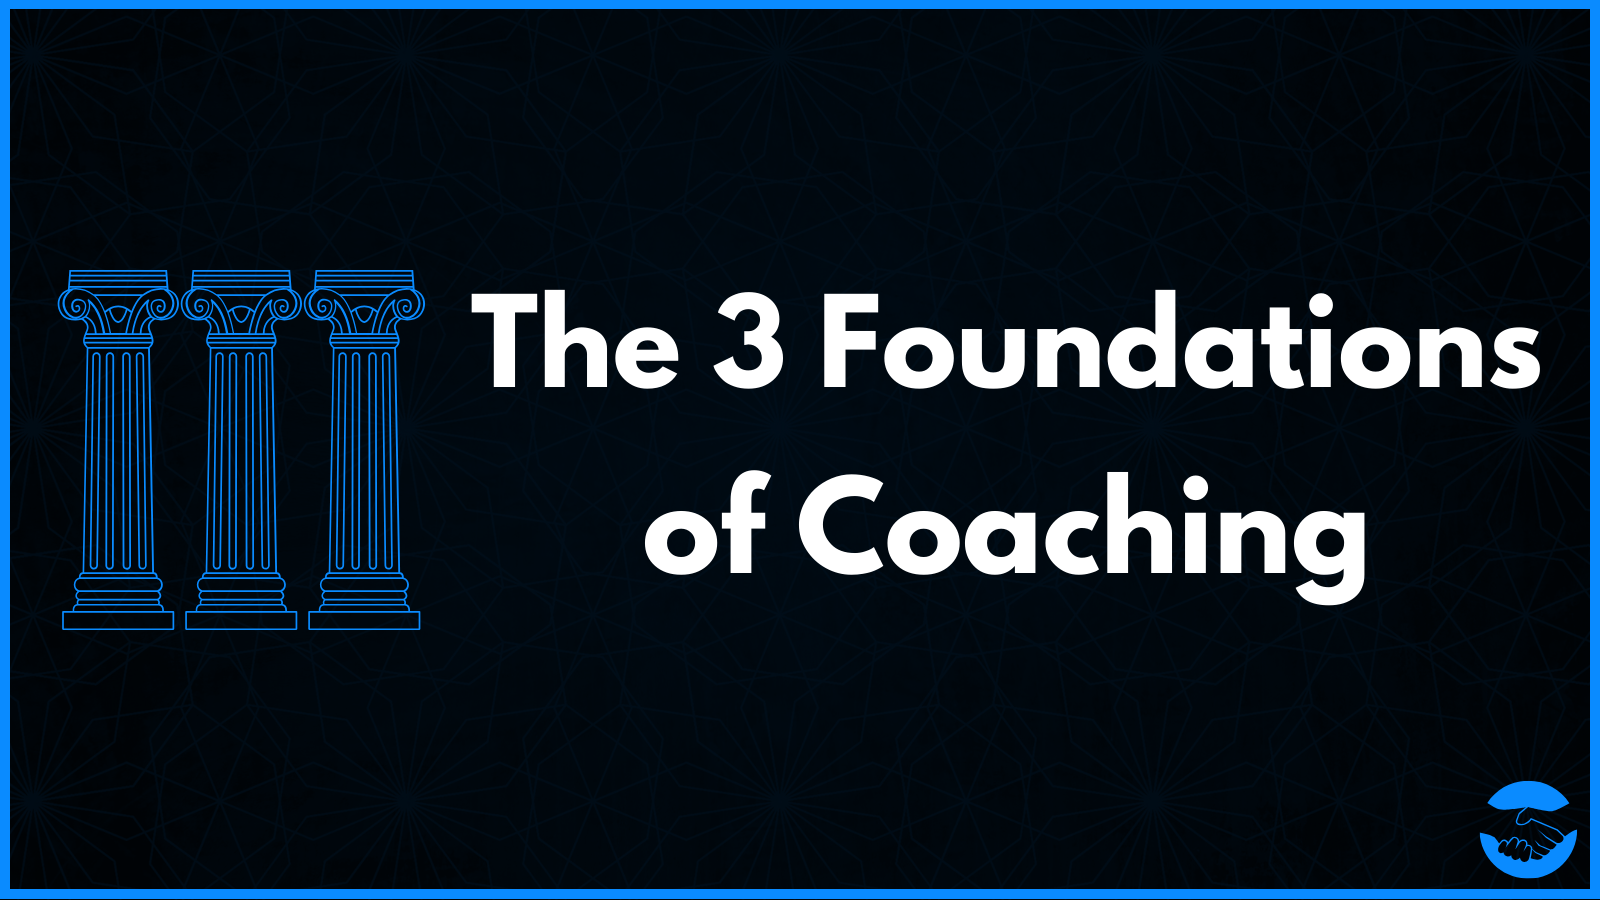 The 3 Foundational Skills Every Great Coach Masters First